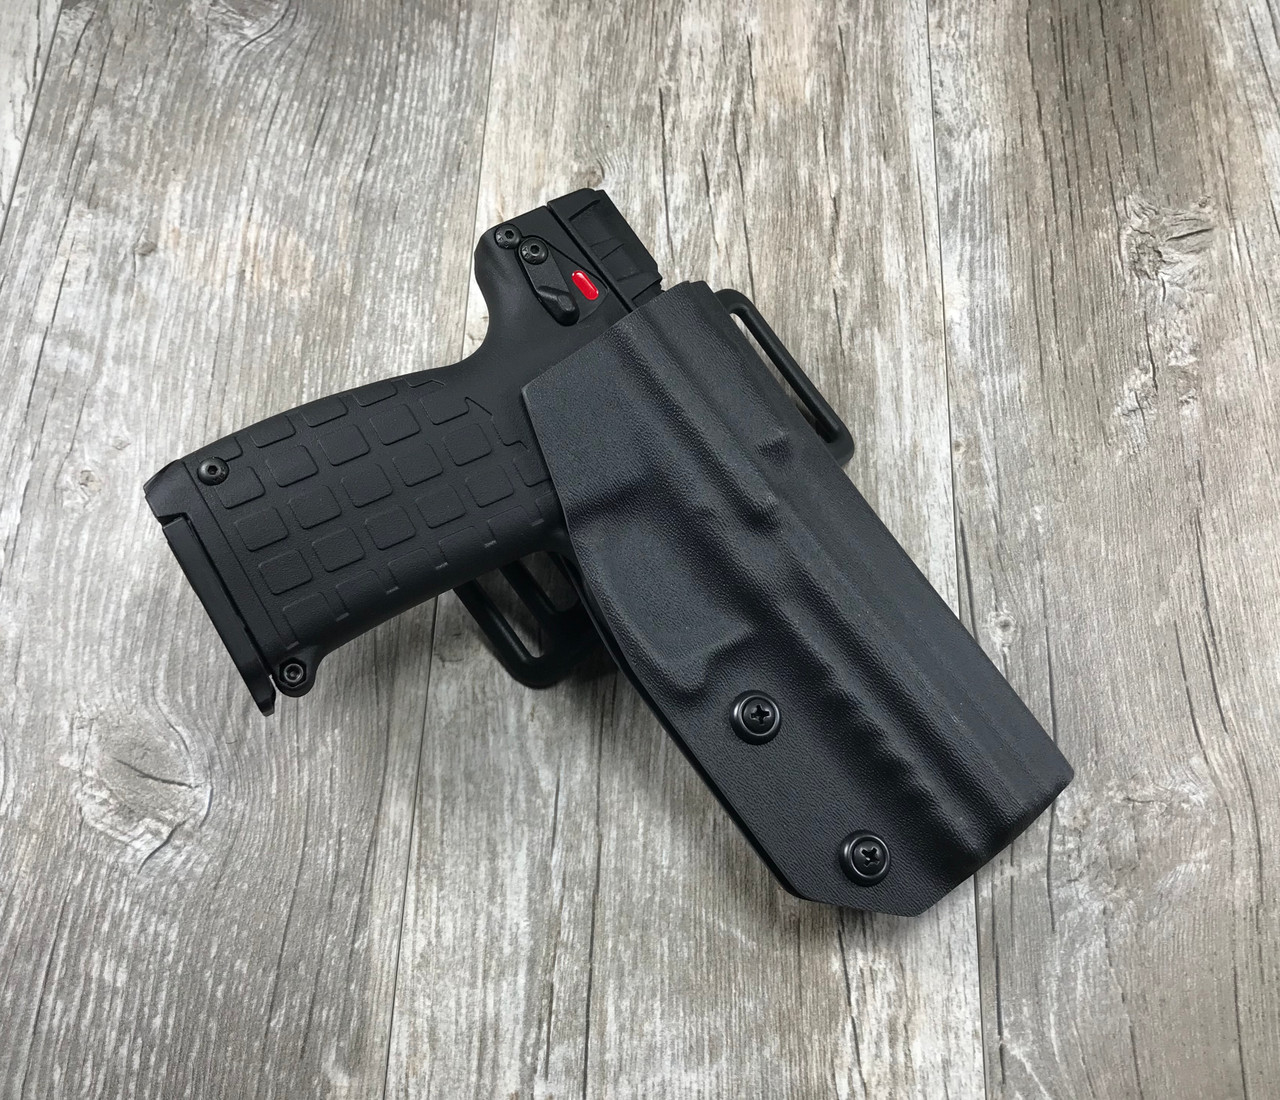 Sig Sauer P238 paddle holster by SDH Swift Draw Holsters